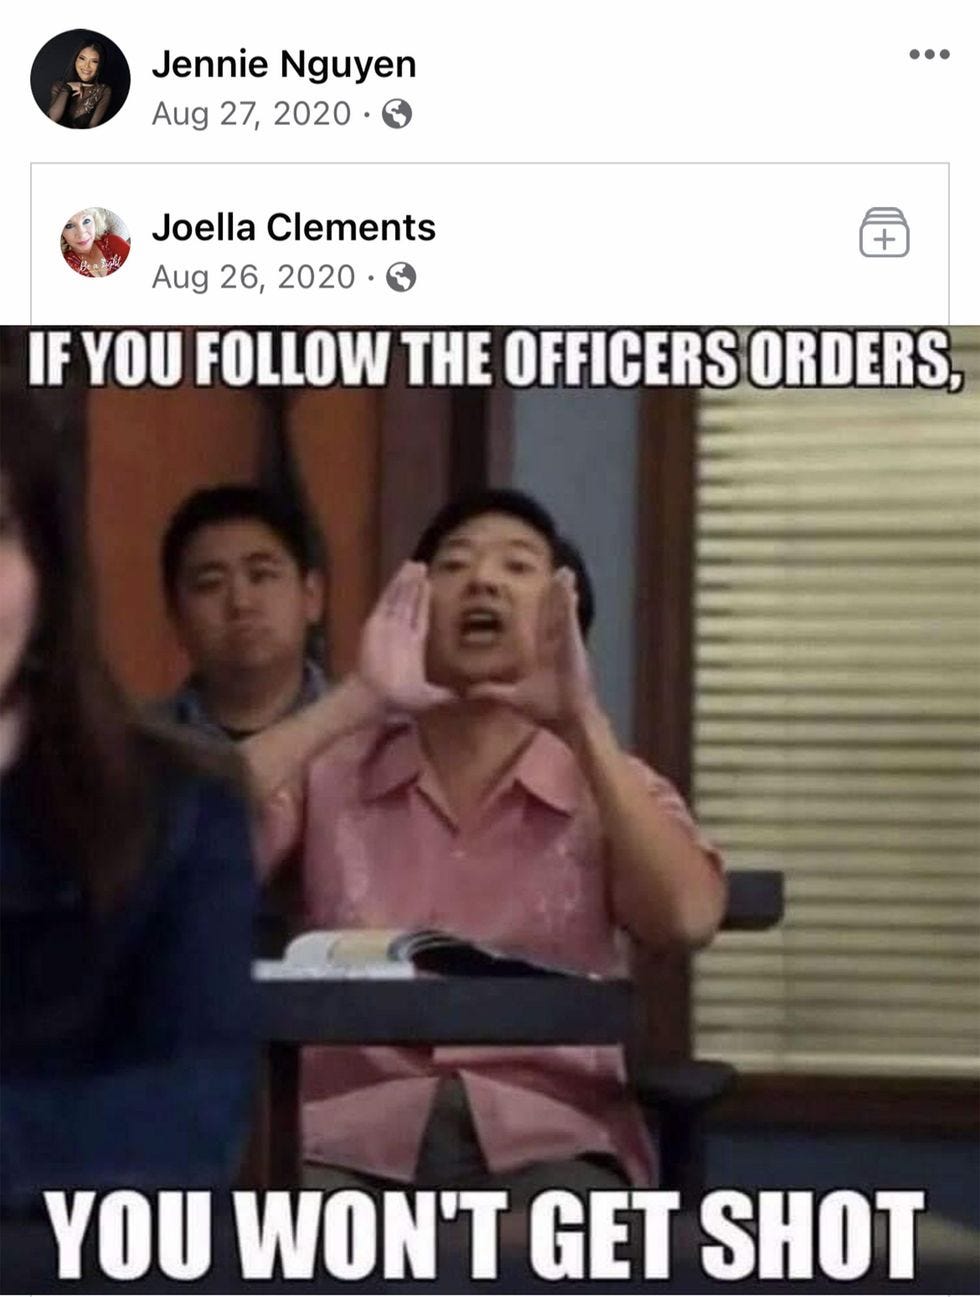 Picture of Ken Jeong, as Ben Chang on Community yelling, with meme text "If you follow the officer's orders, you won't get shot"